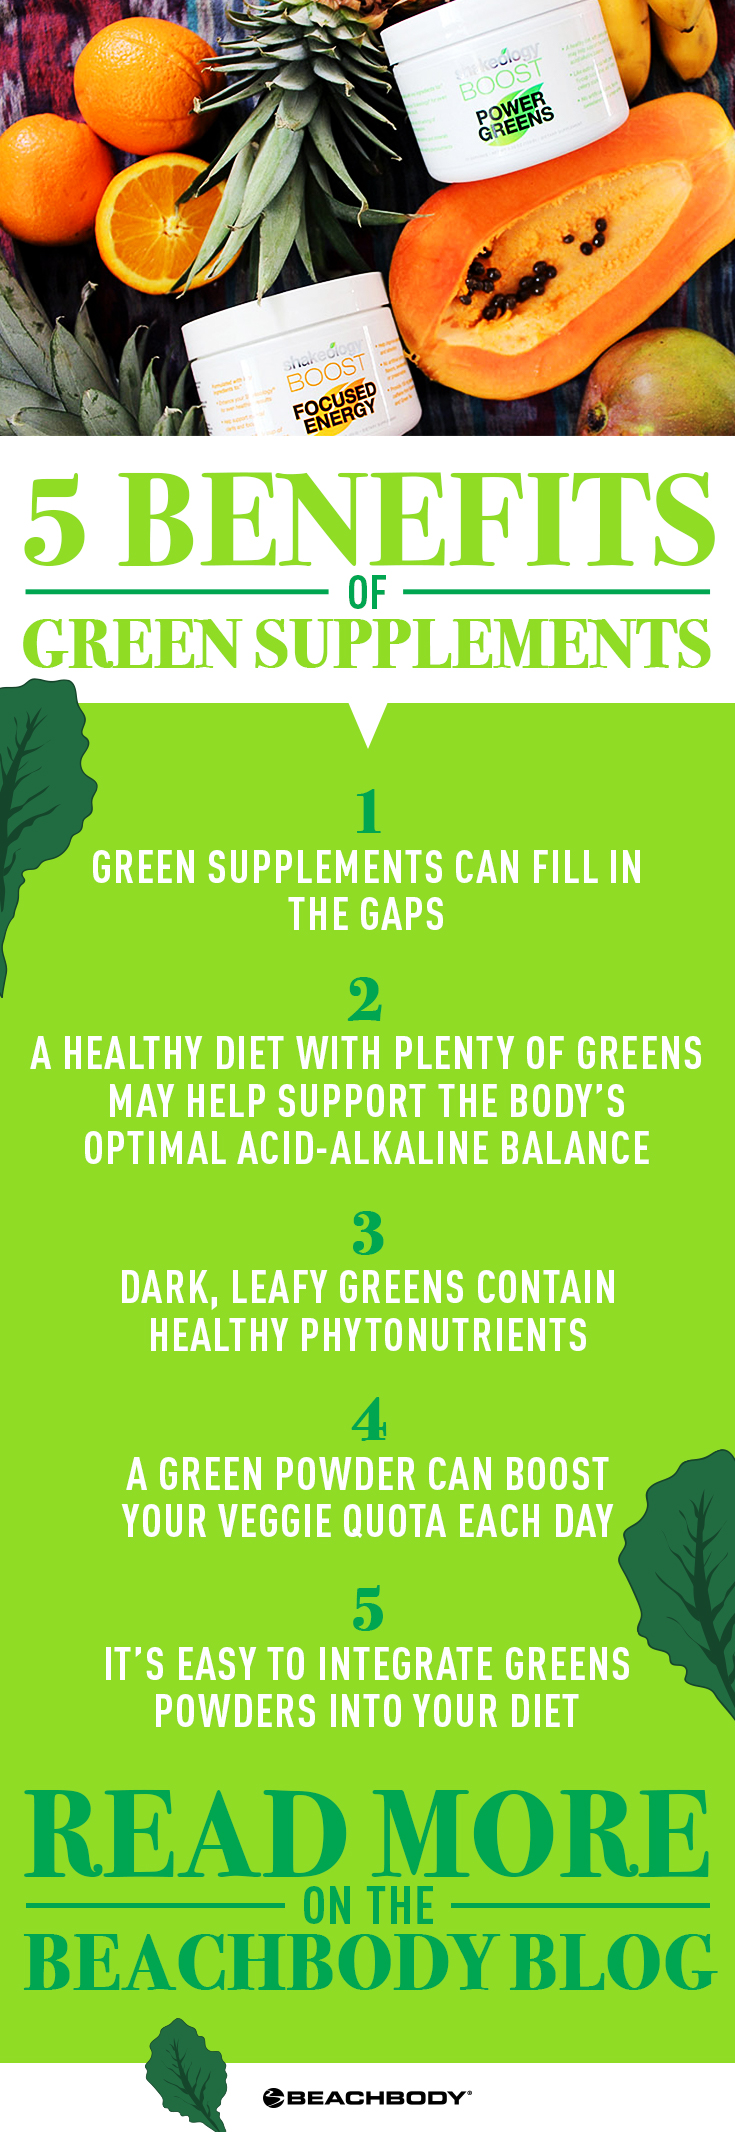 How Greens Supplement Review: A Look At The Top 13 Brands can Save You Time, Stress, and Money.